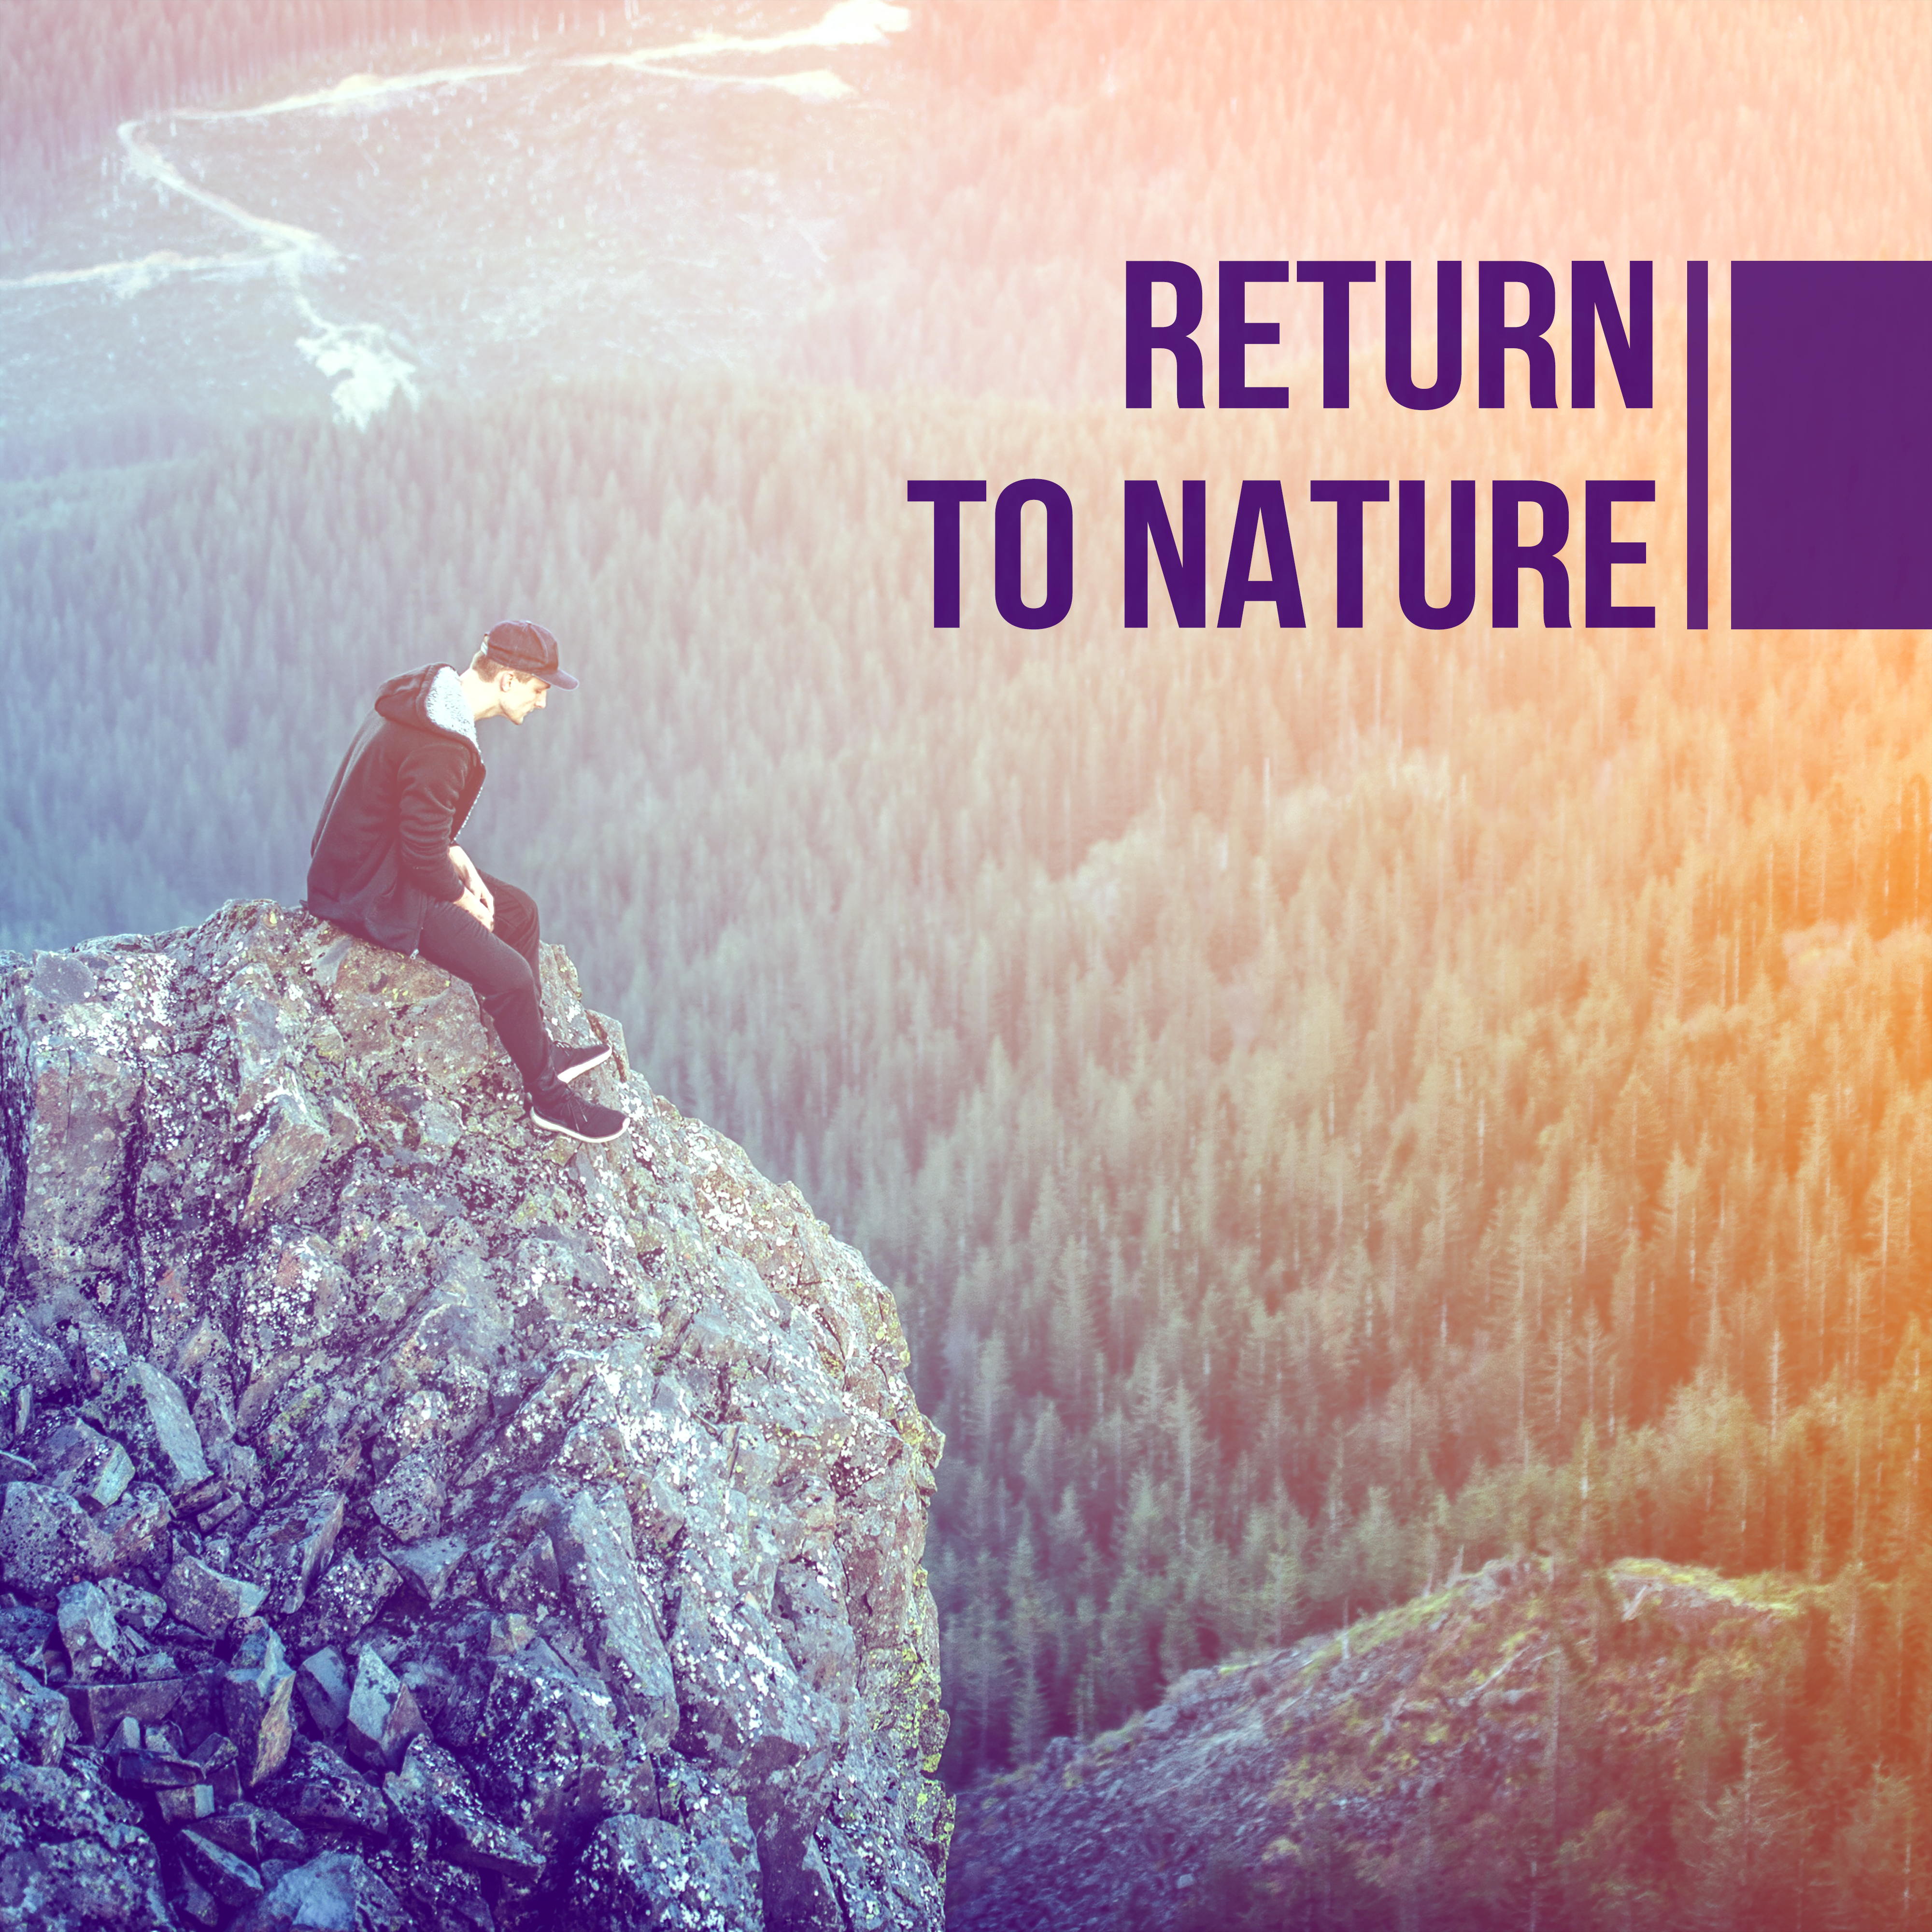 Return to Nature – Deep Relaxation, Nature Sounds, Tranquility & Rest, Soothing Water, Singing Birds, Pure Mind